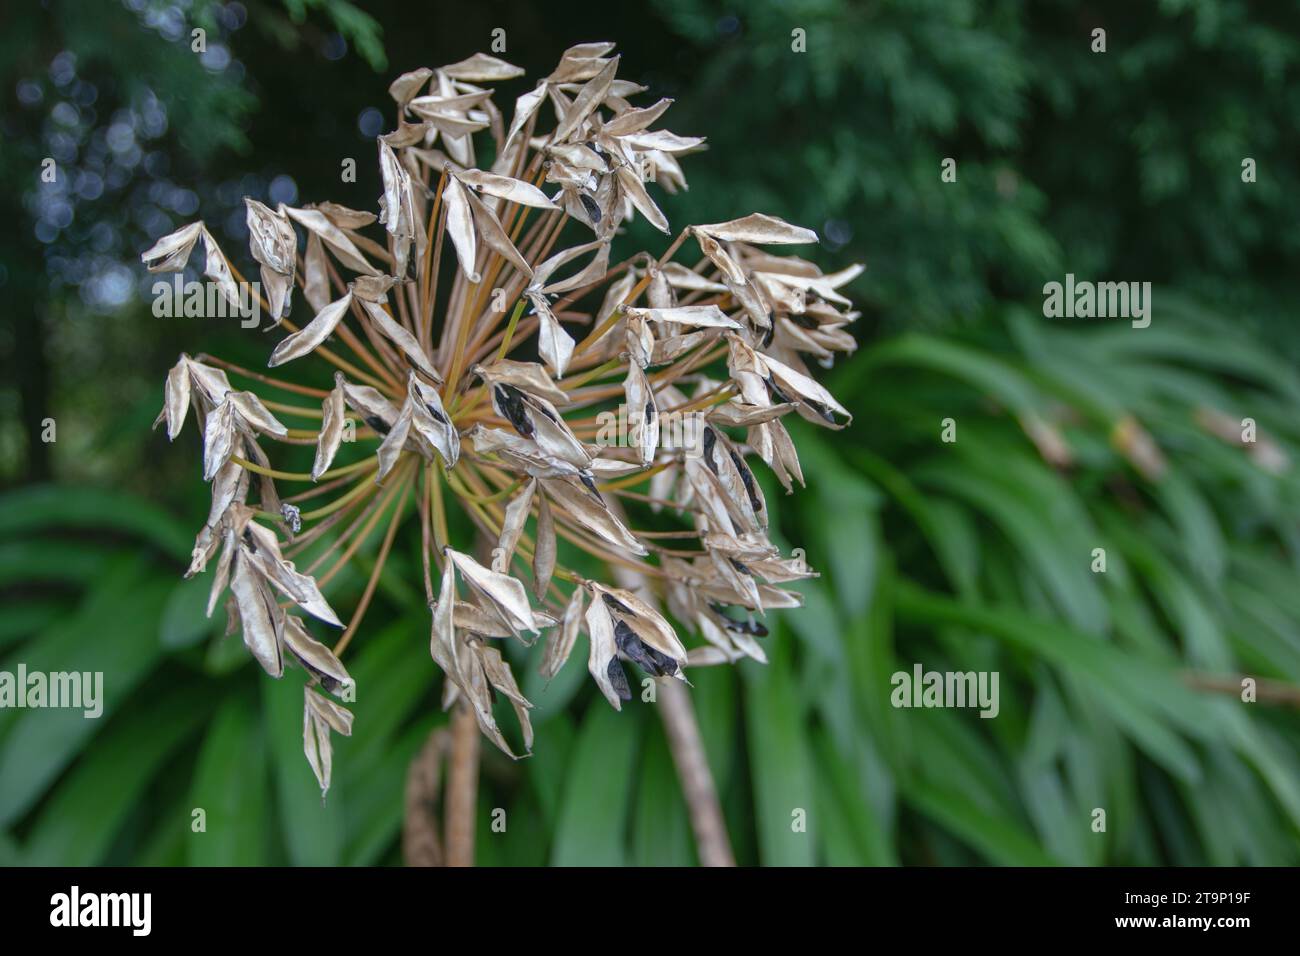 Agapanthus praecox pseudo-umbel with mature three-sided capsules split open fruits with black flattened winged seeds. Blue lily or lily of the Nile or Stock Photo